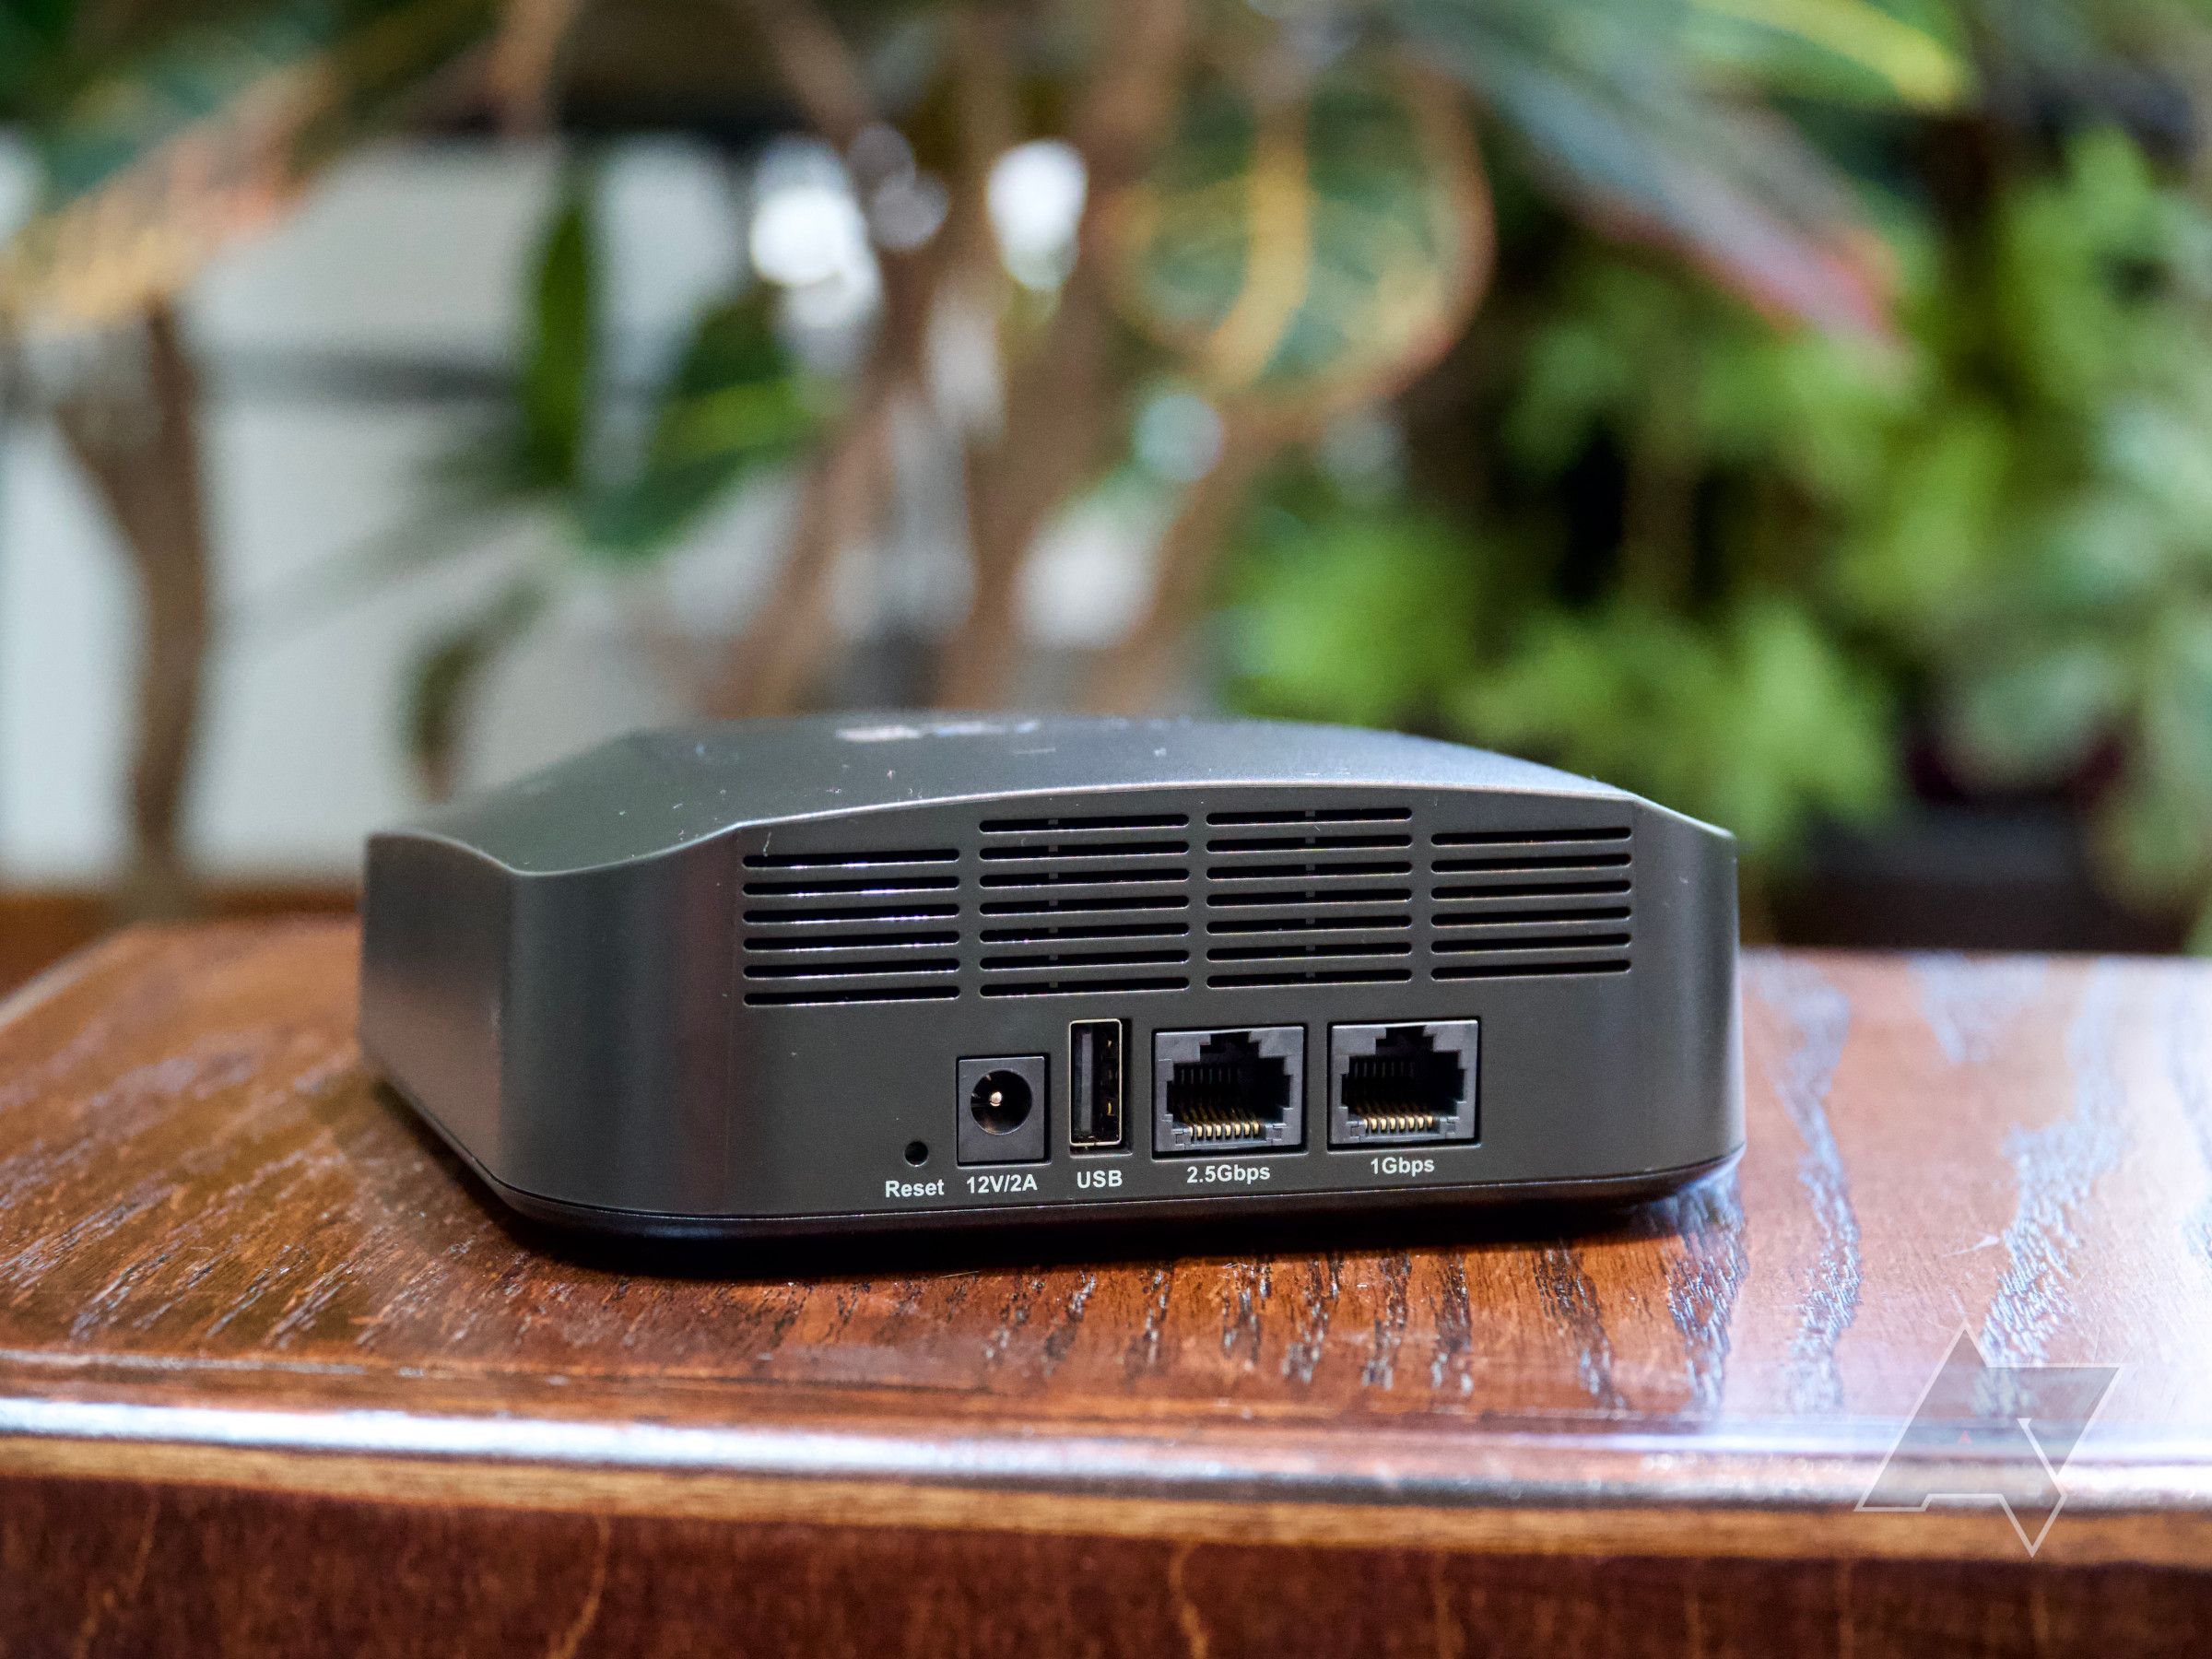 Wyze Mesh Router Pro with two Ethernet ports, one at 2.5Gbps, and an unused USB port